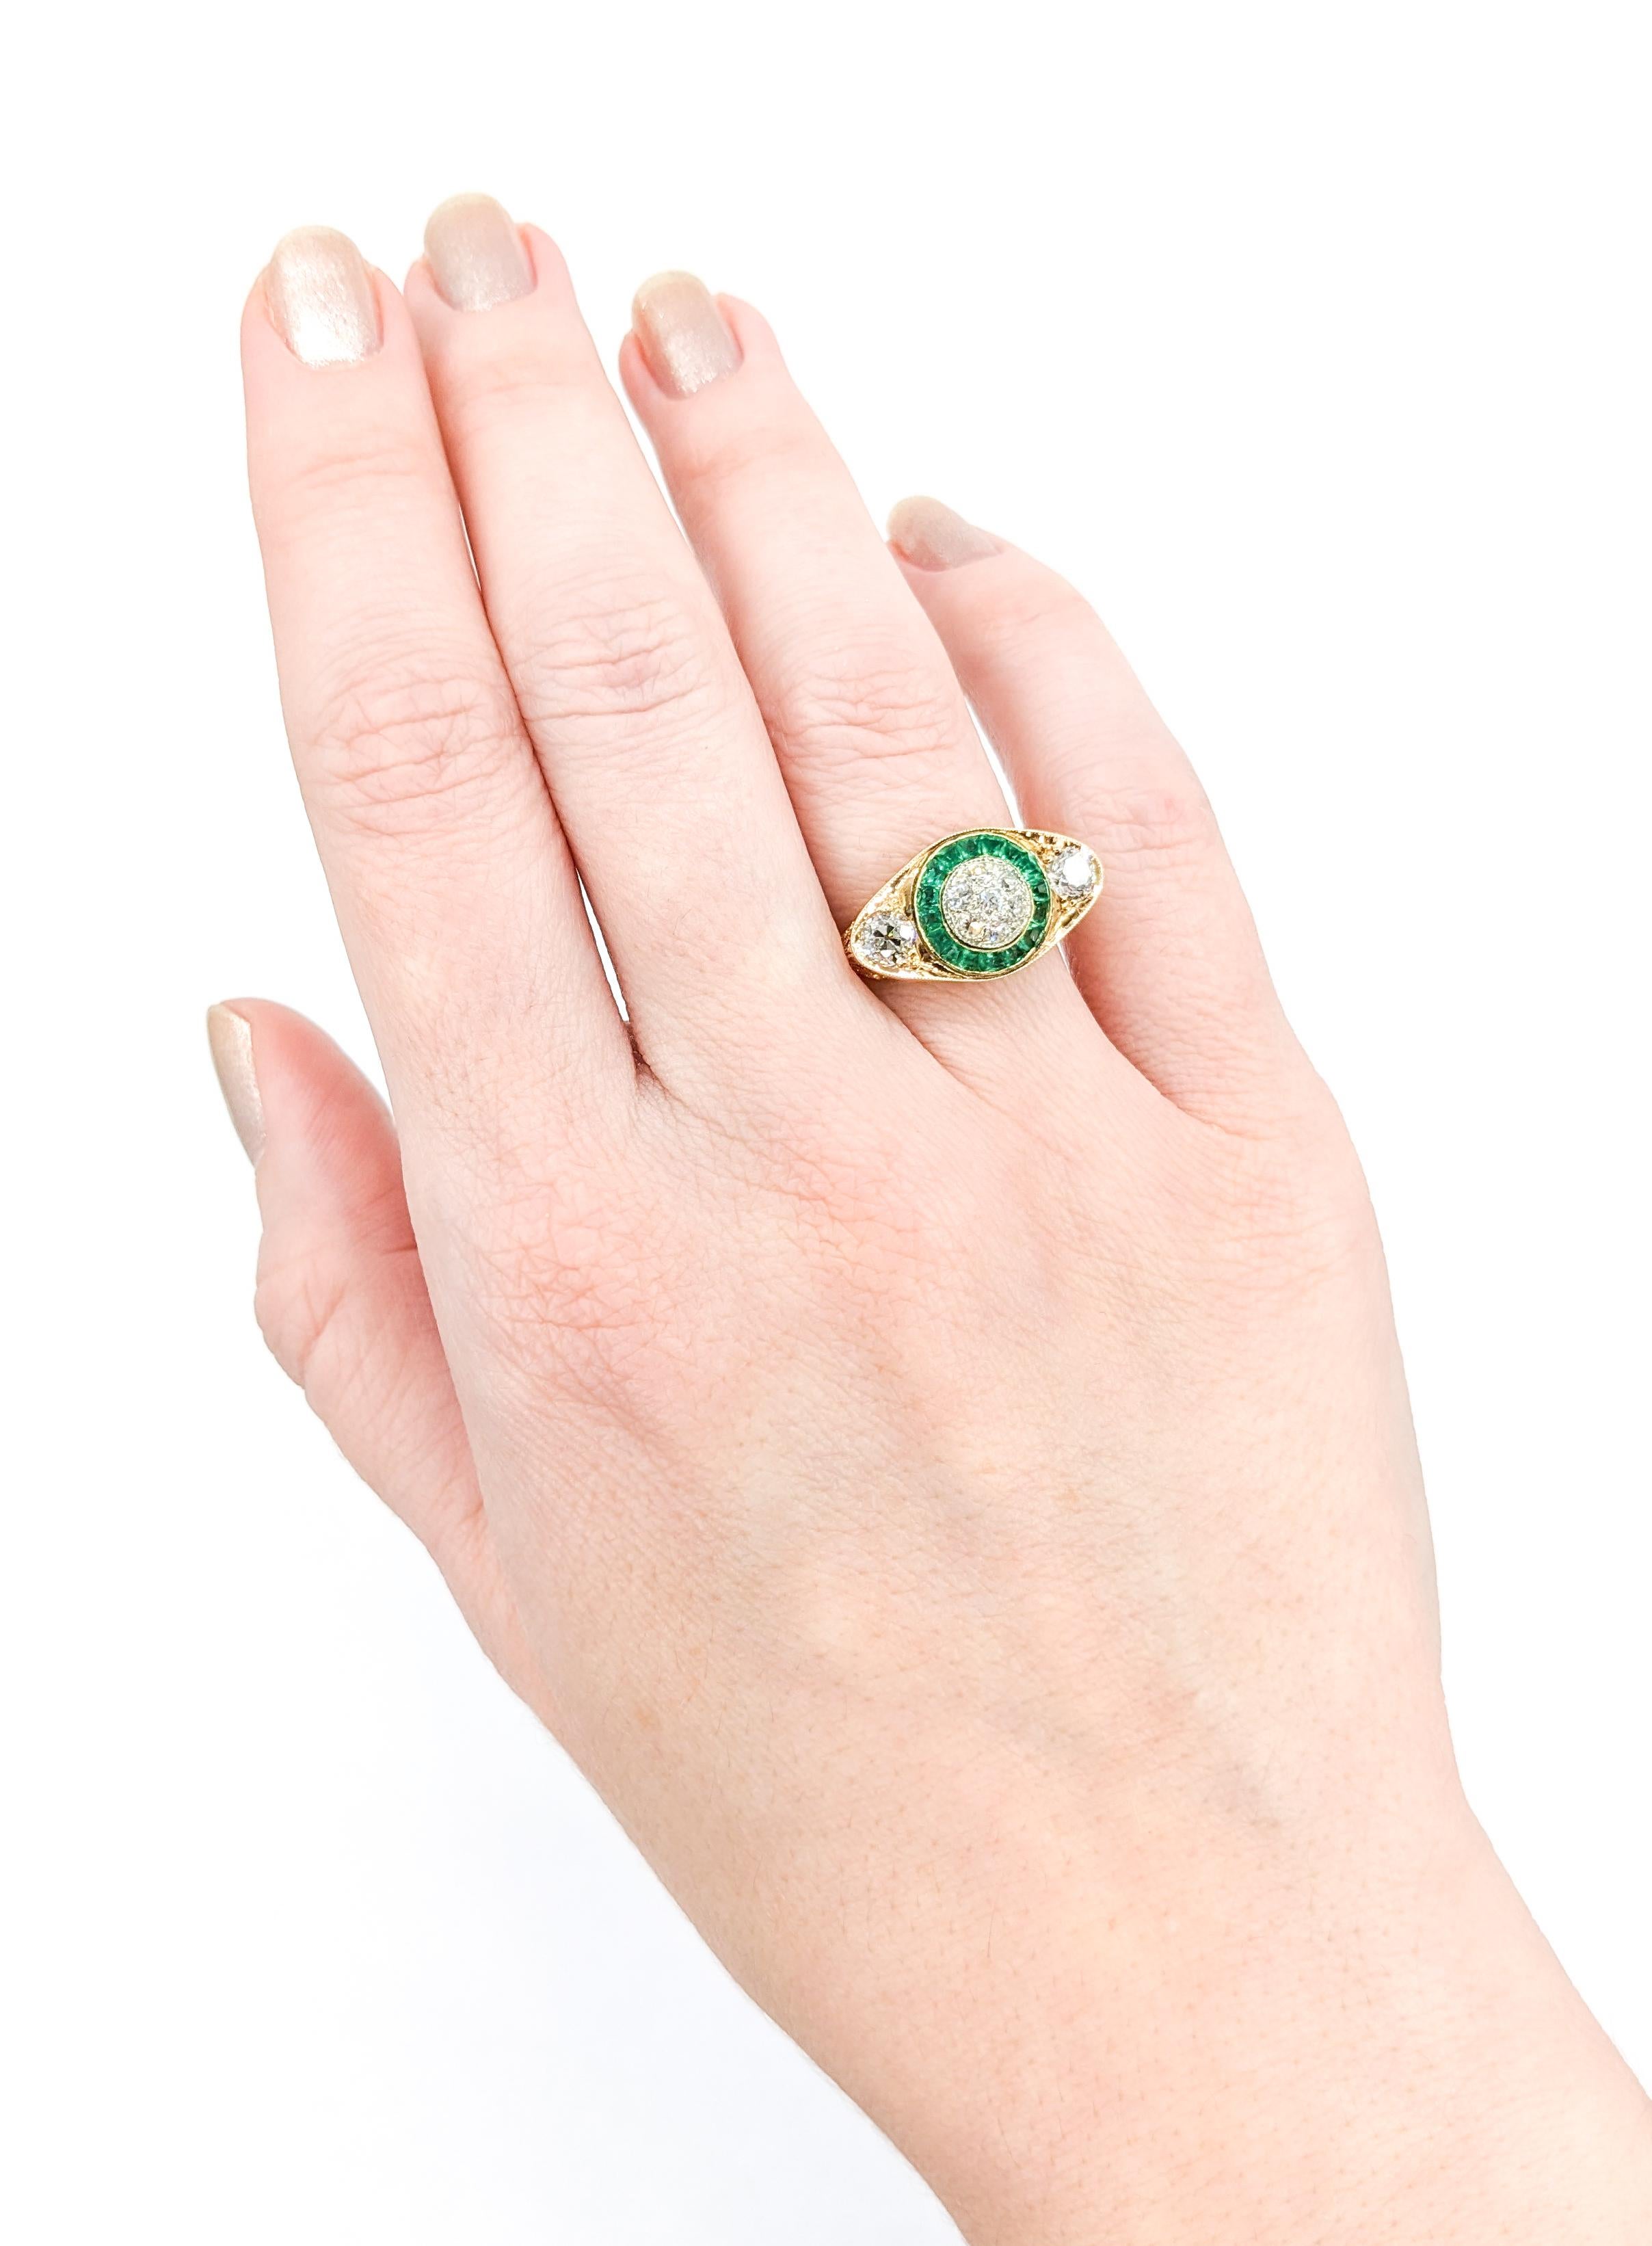 Antique Old European Diamond & Emeralds Target Ring in 14K Gold

Experience timeless elegance with this beautiful antique target ring, intricately crafted in 14k Yellow Gold with filigree details. This exquisite piece is adorned with .80ctw Old